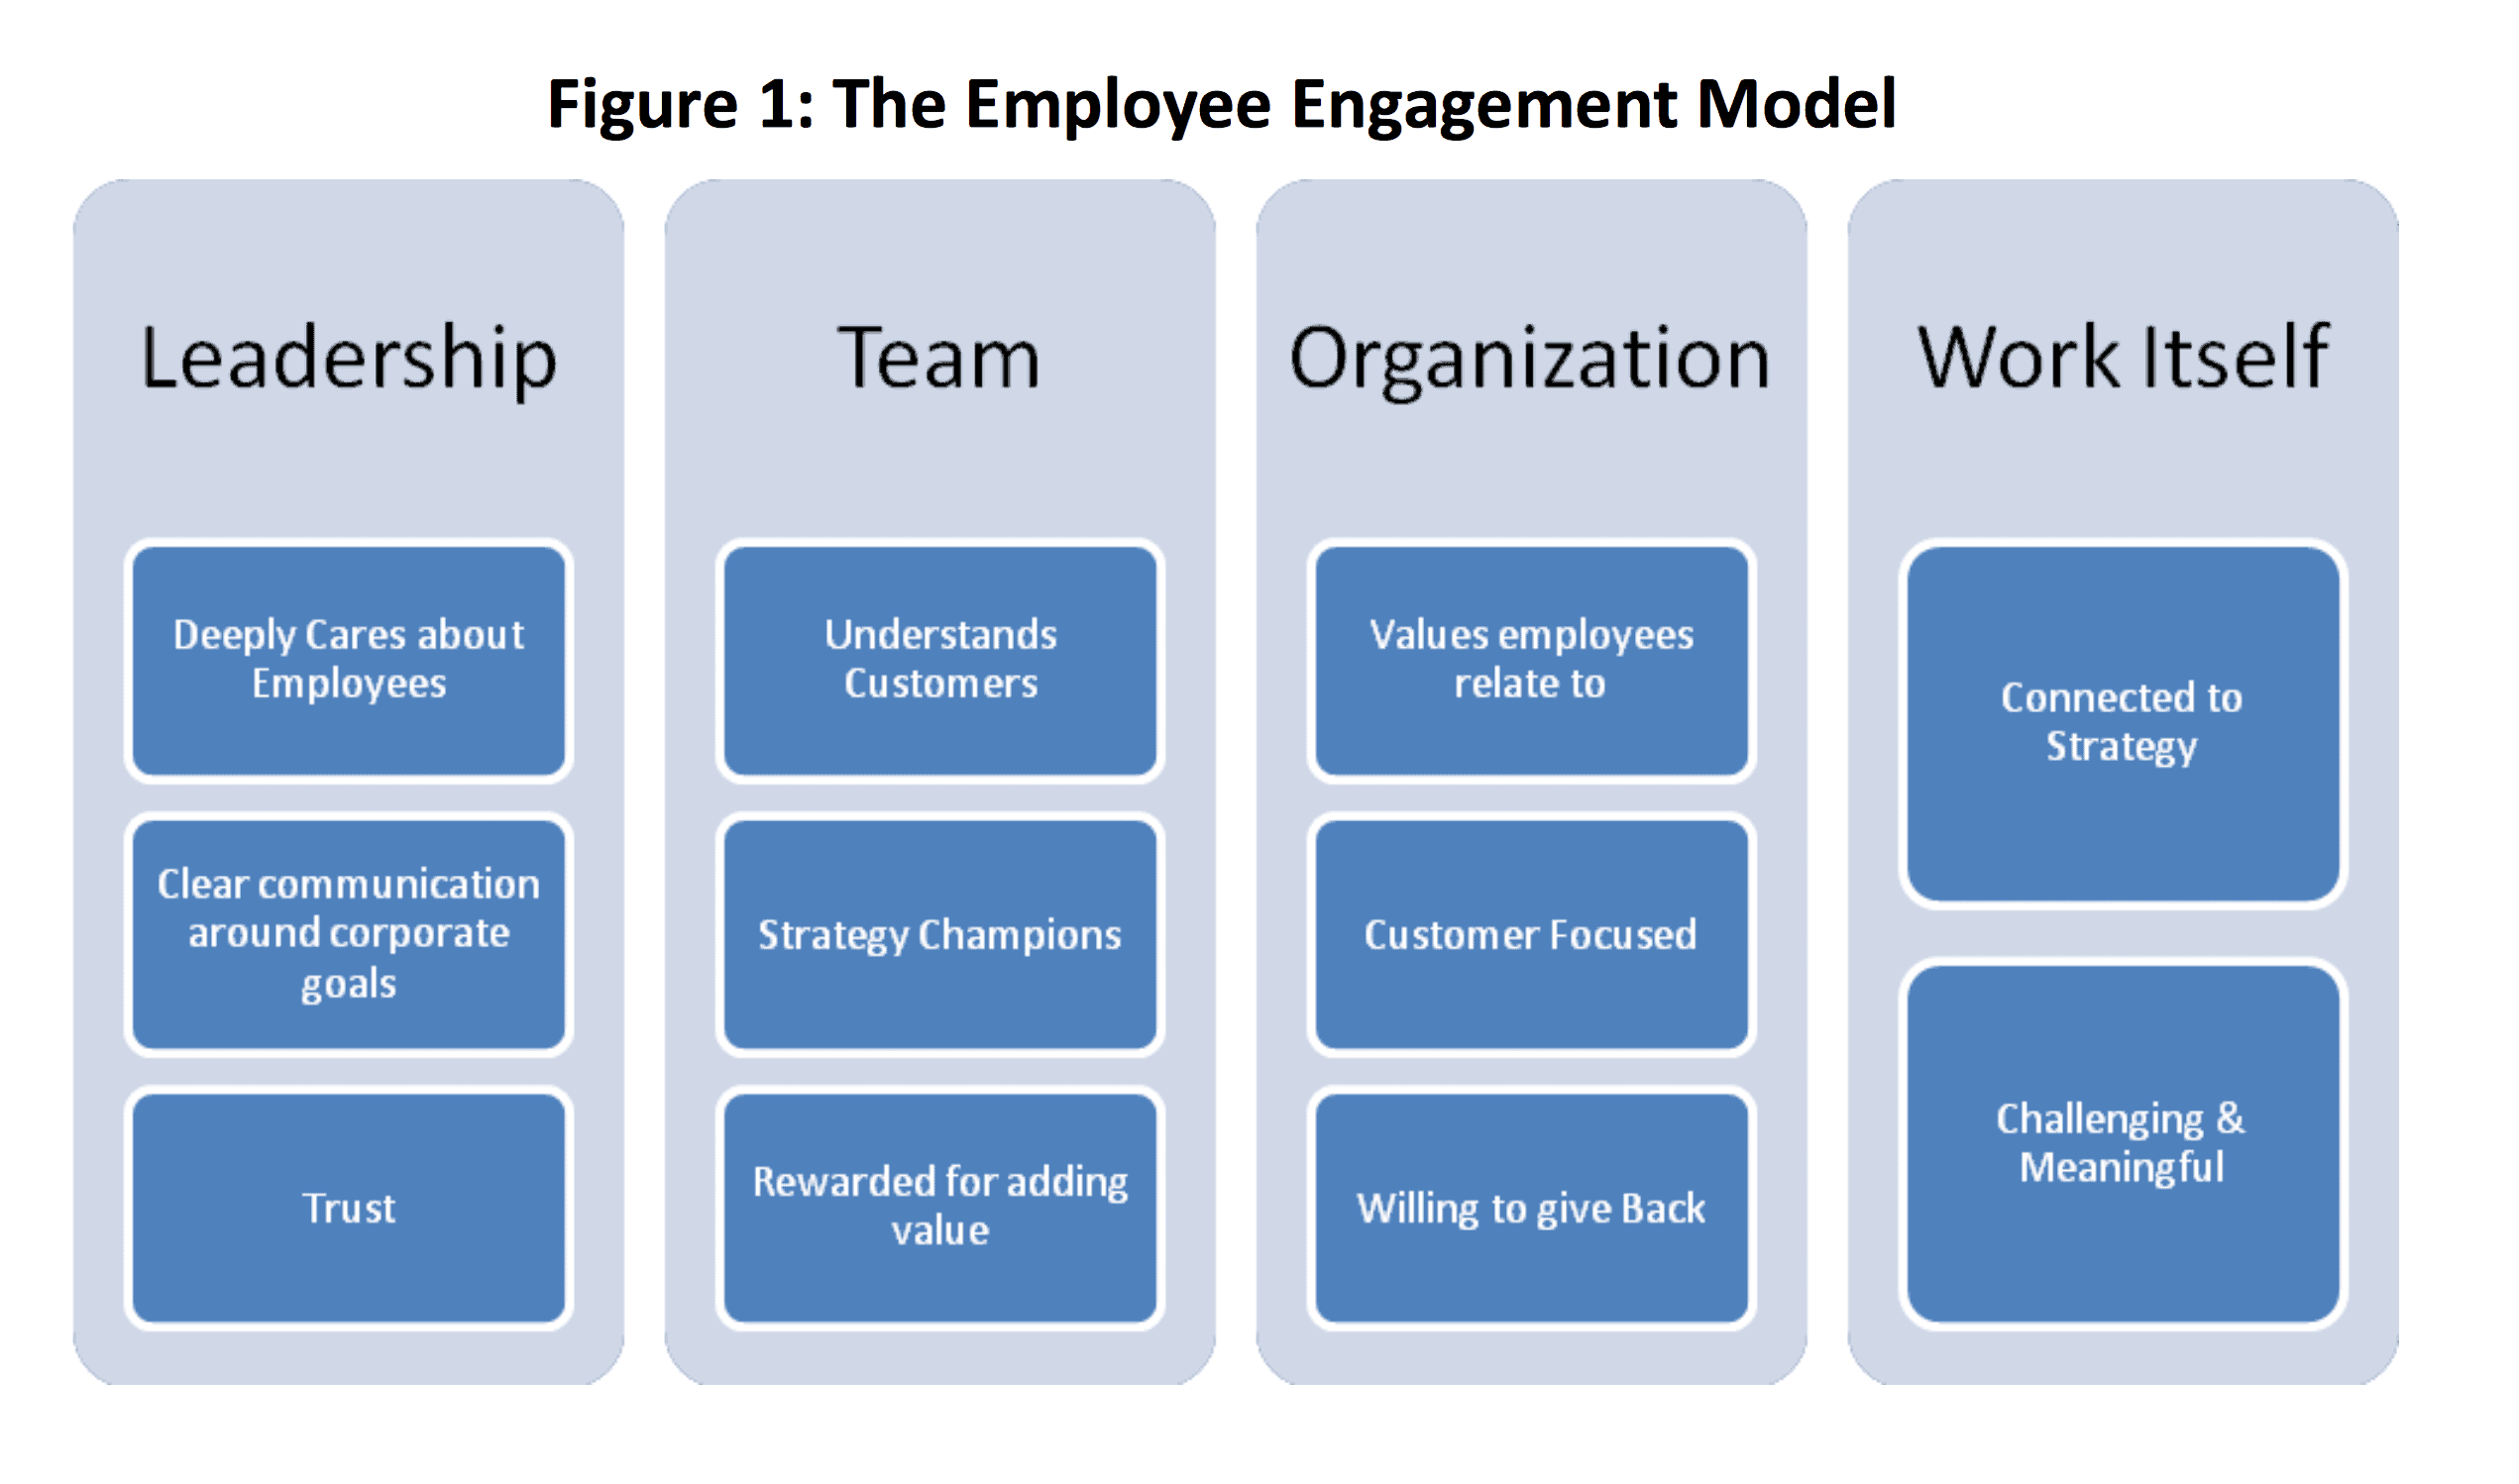 The Employee Engagement Model